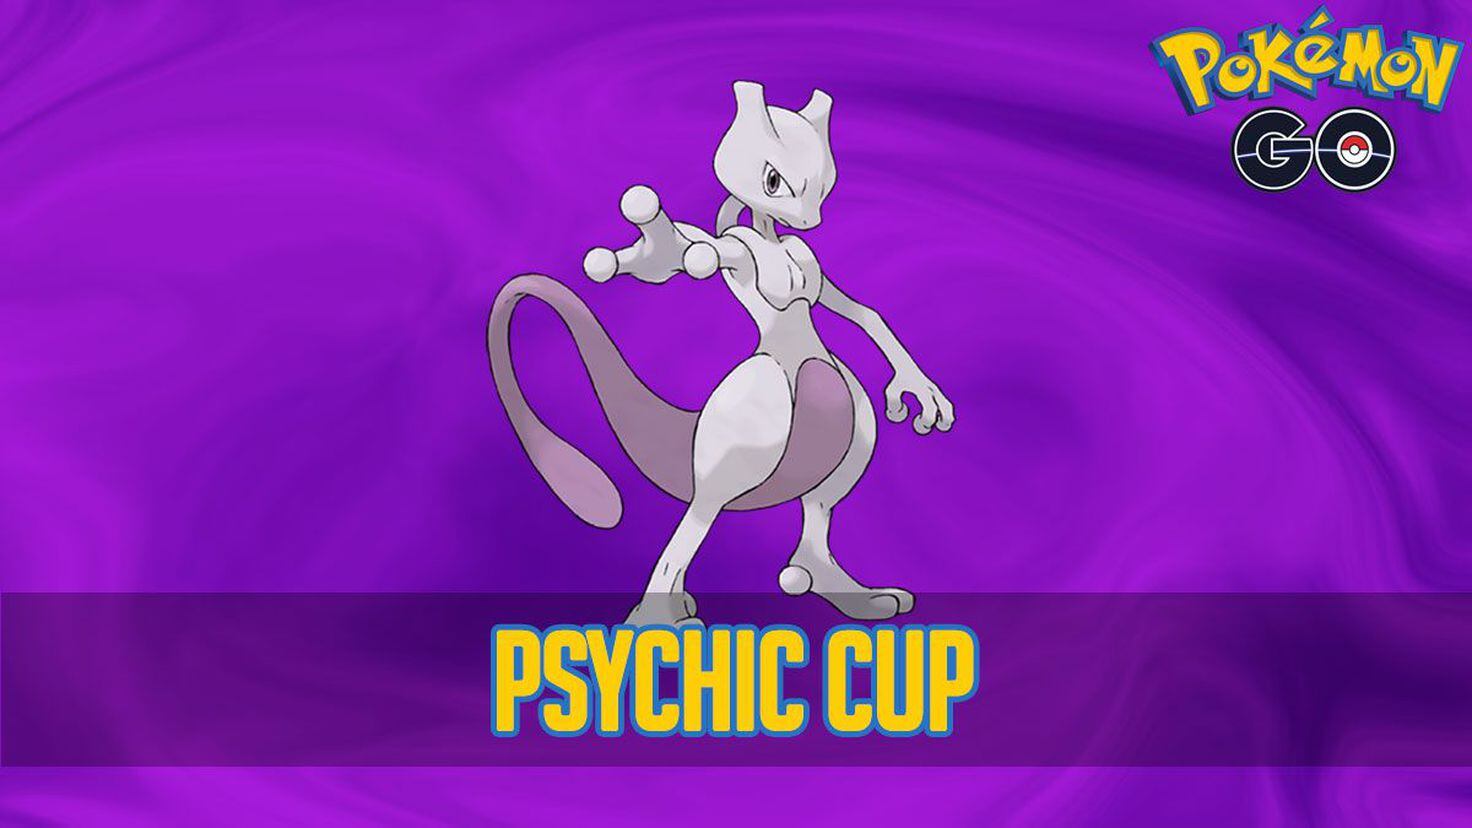 BEST OF THE BEST - IS PSYCHIC OR PSYSTRIKE BEST? - BEST MEWTWO MOVESET  STRATEGY